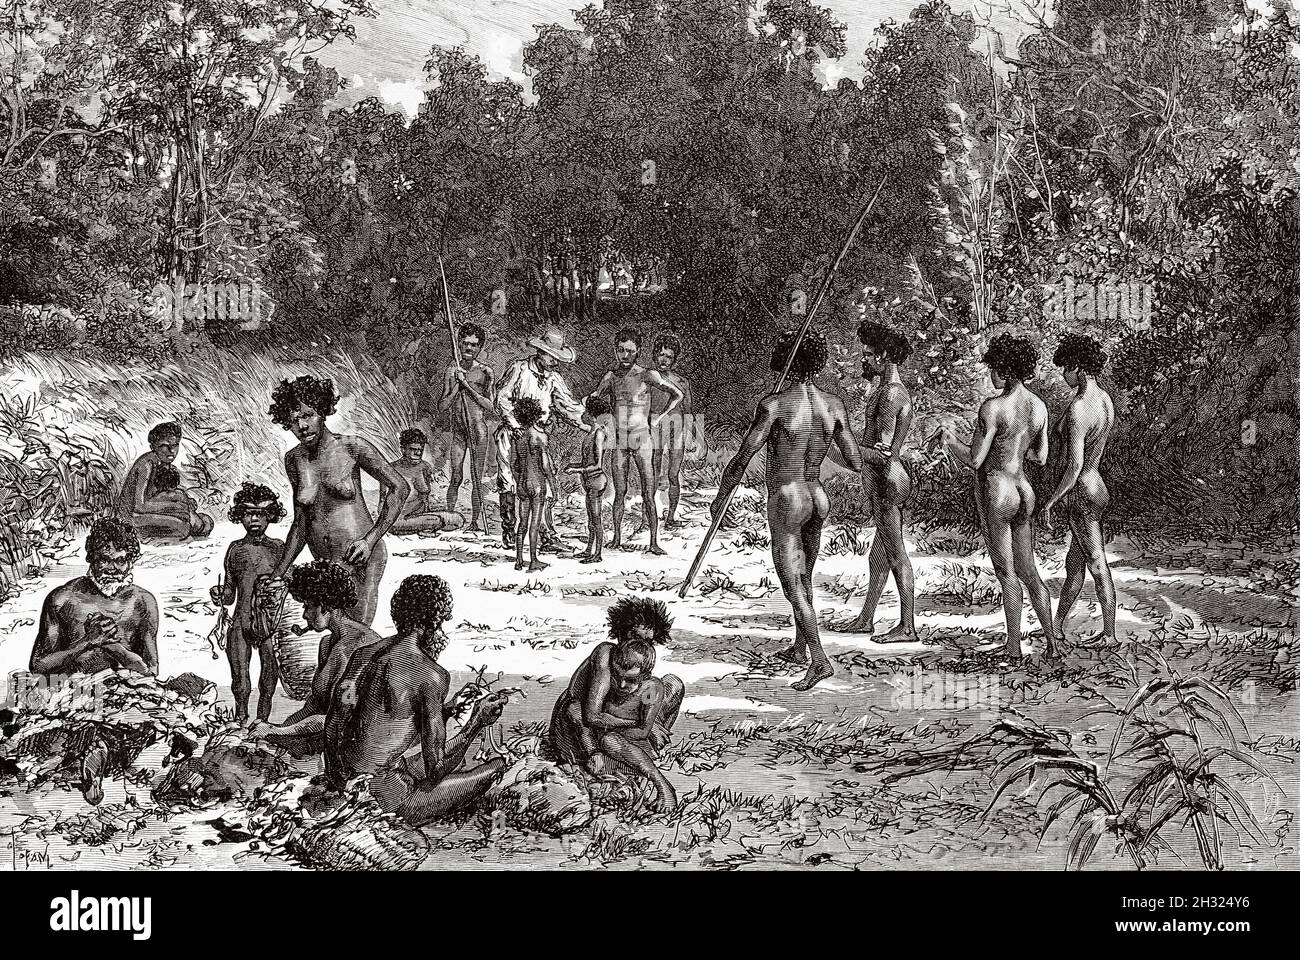 Camp of a wild indigenous tribe. Queensland, Australia. Old 19th century engraved illustration, Journey to Northeast Australia by Carl Lumholtz 1880-1884 from Le Tour du Monde 1889 Stock Photo